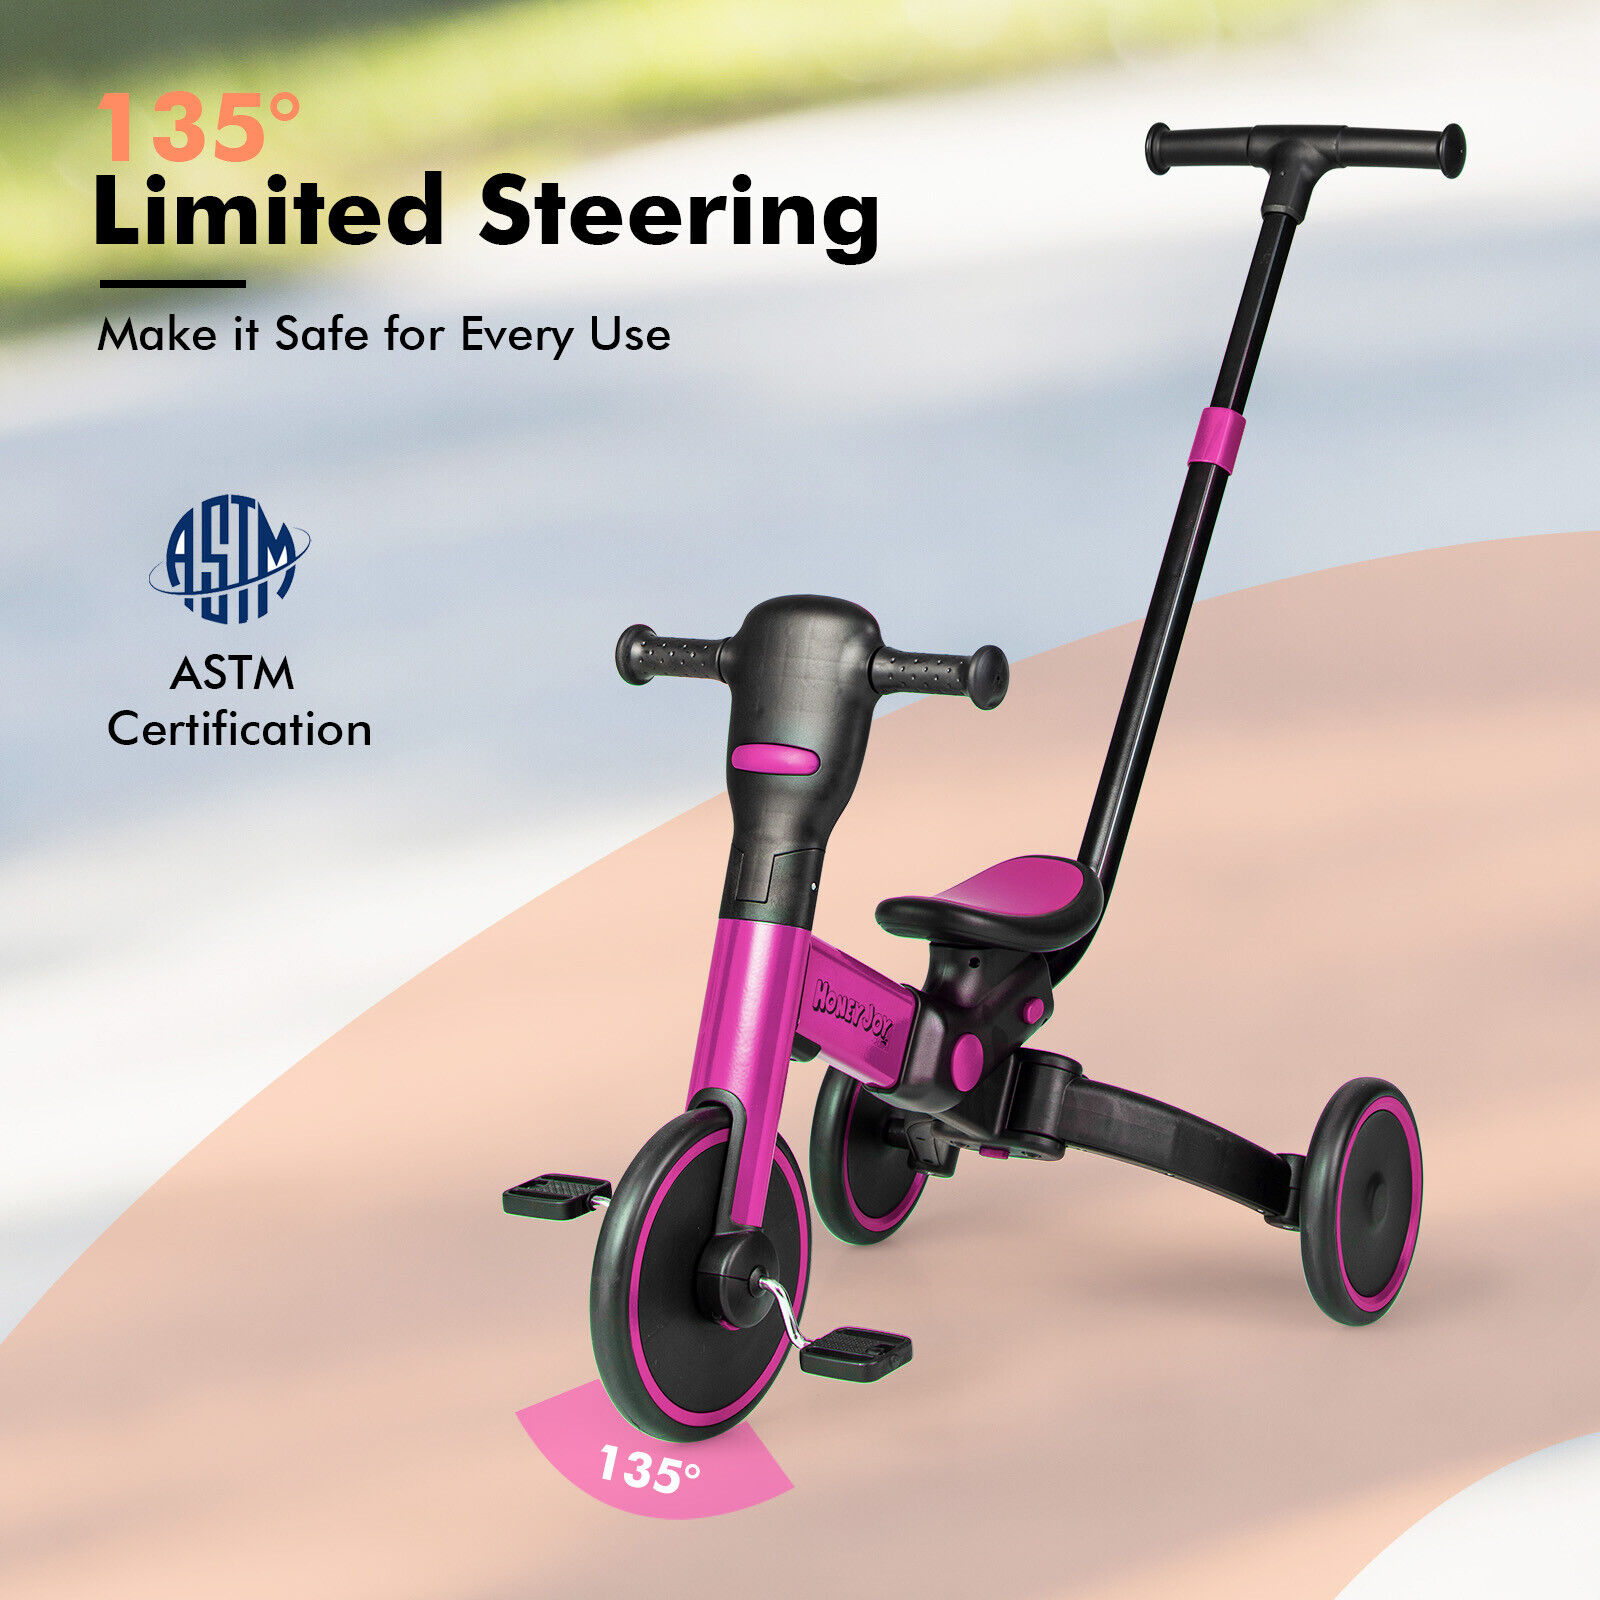 Great Choice Products 4-In-1 Kids Tricycle Toddler Trike W/ 135° Limited Steering & Eva Wheels Pink